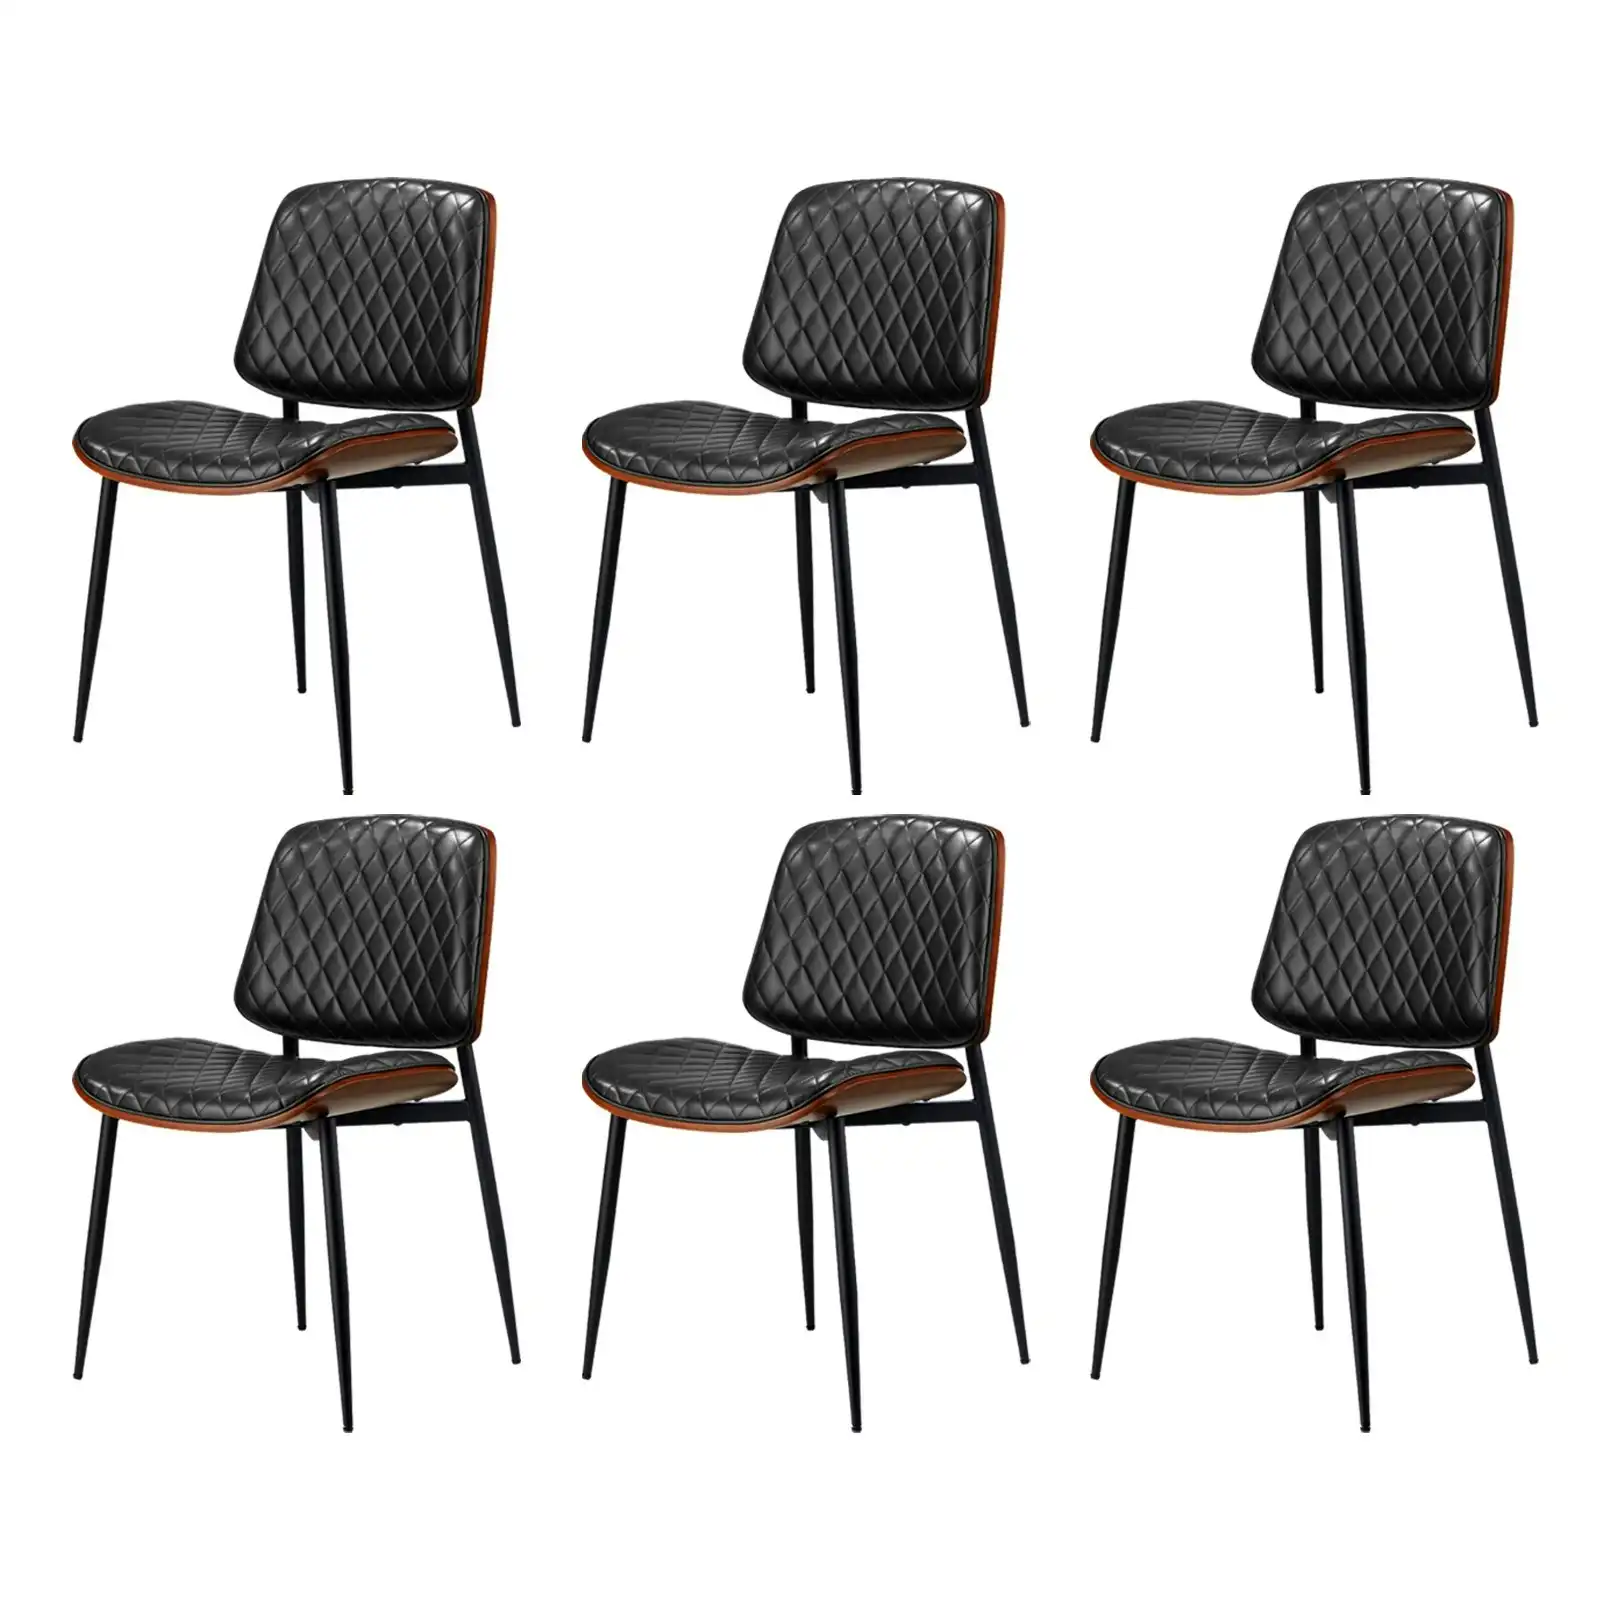 Oikiture 6x Dining Chairs Retro Faux Leather Solid Beech Wood Metal Legs Black